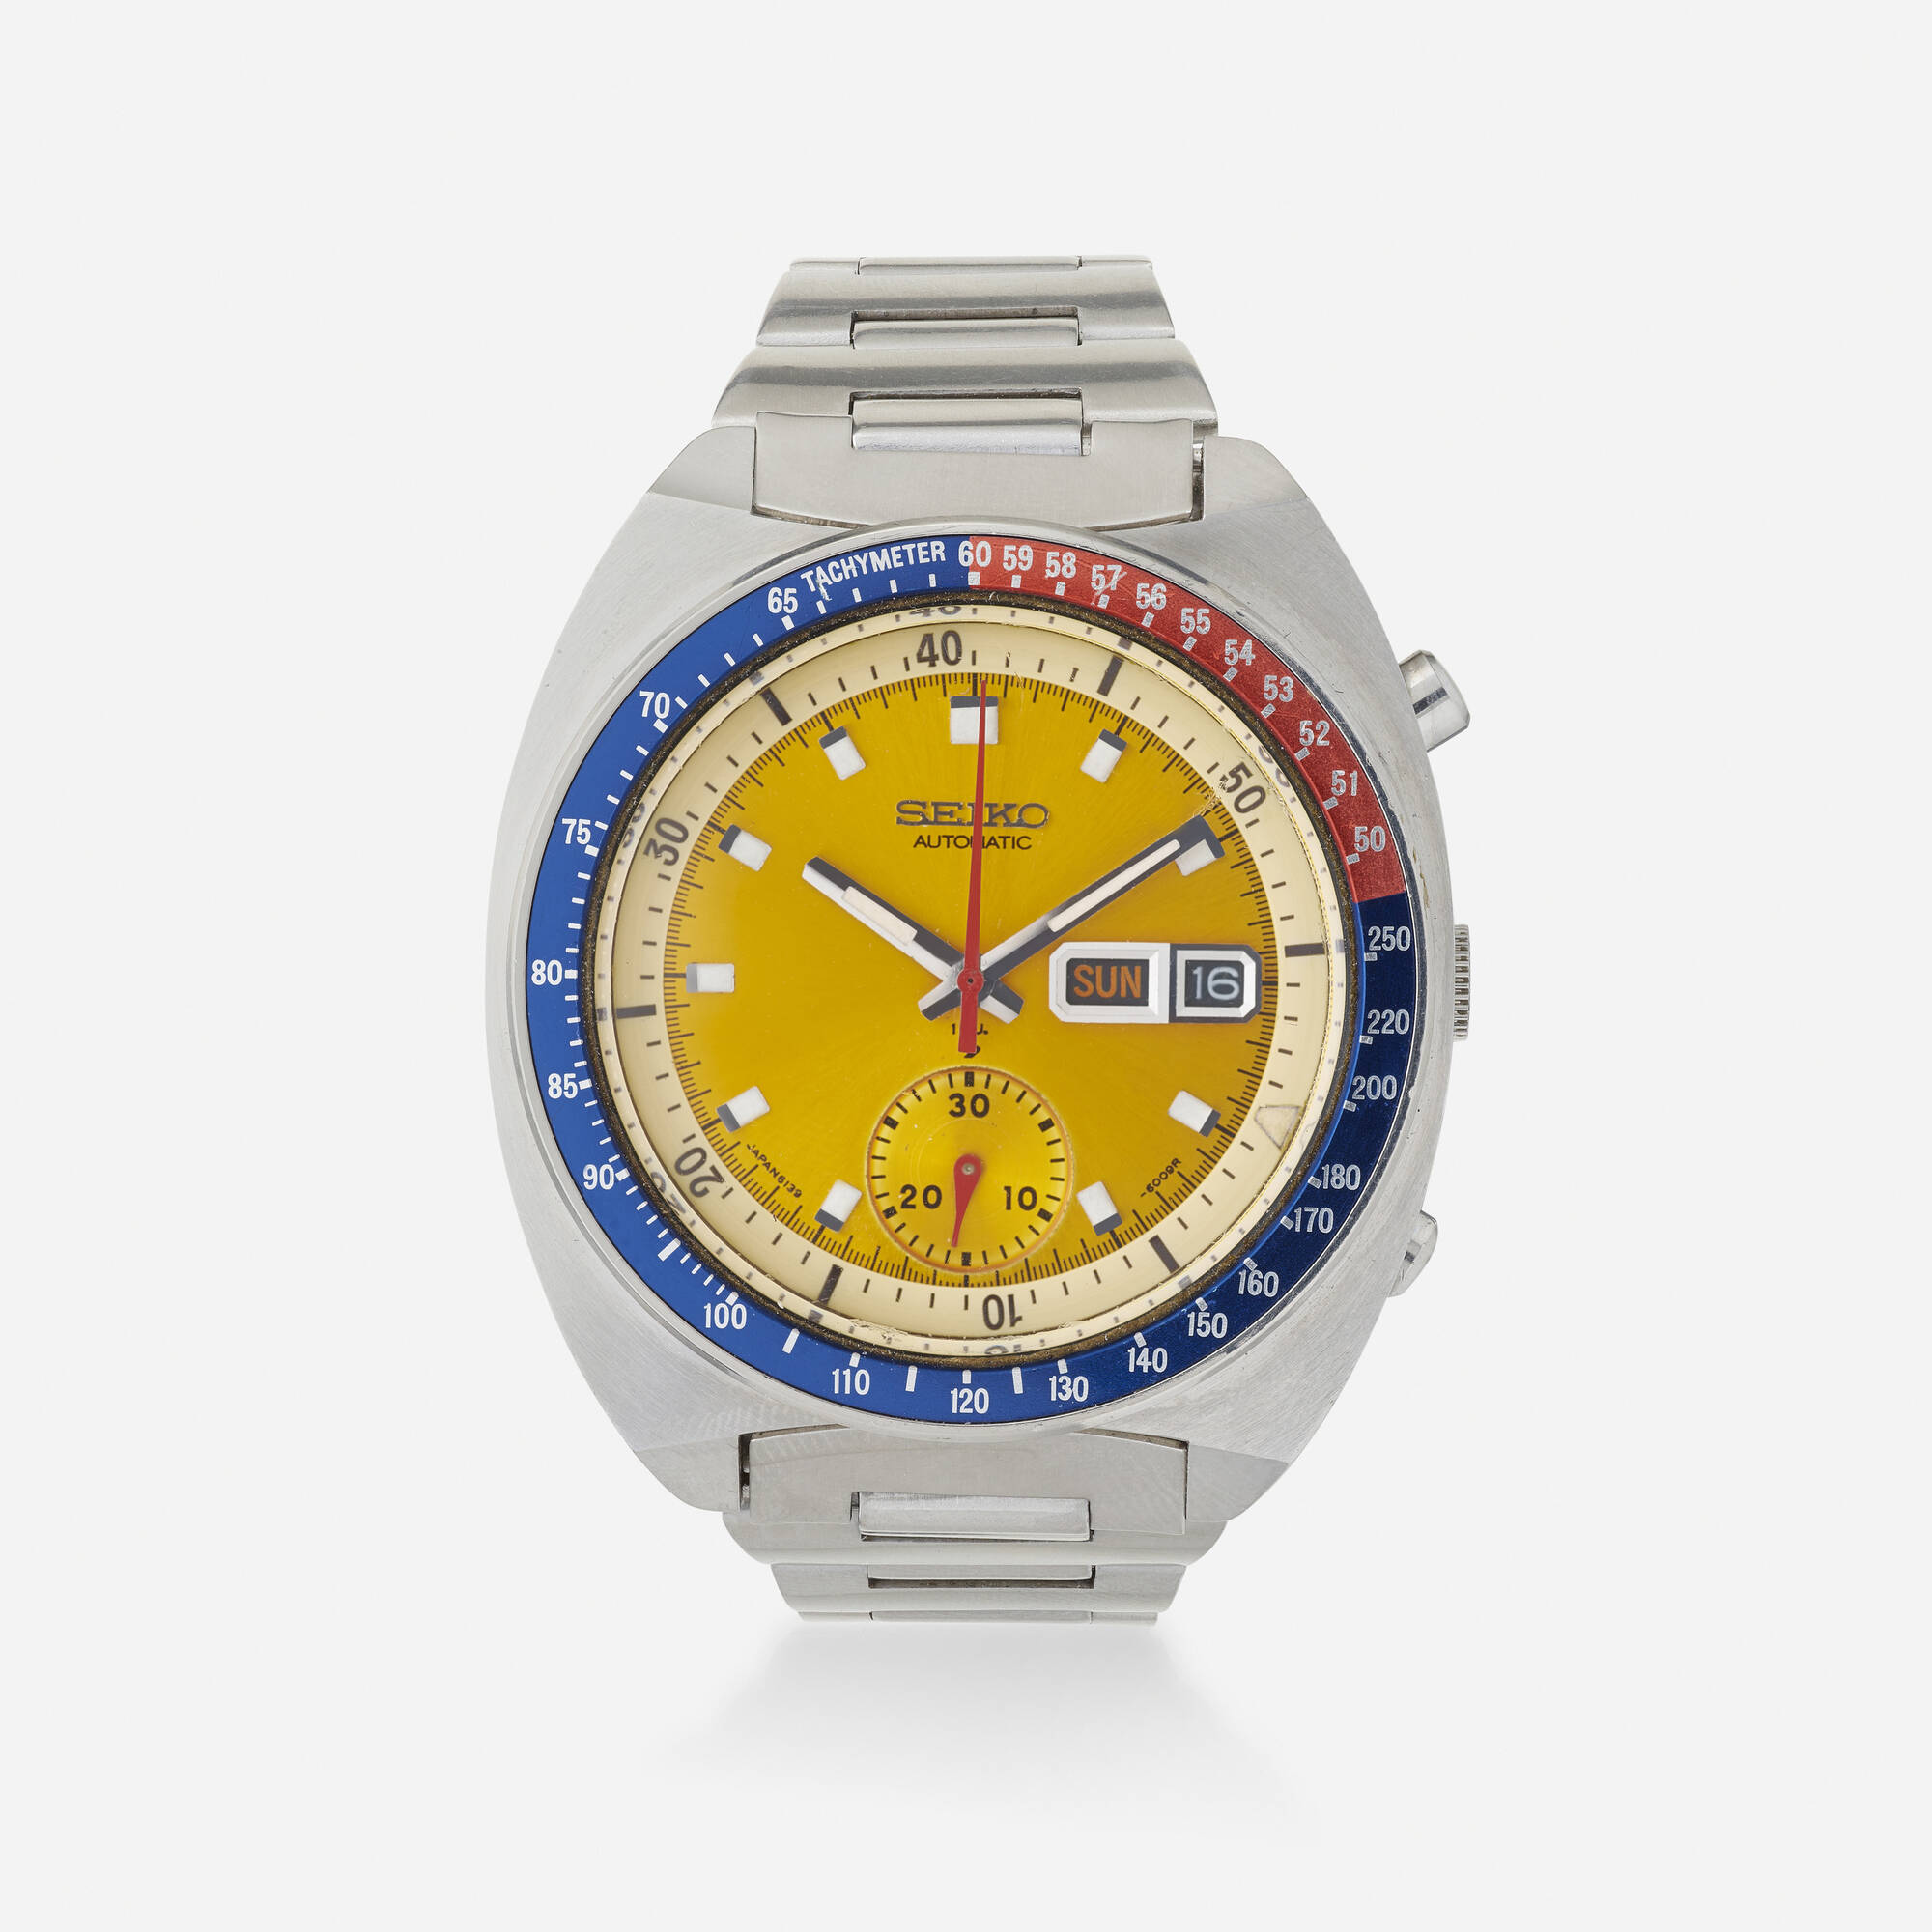 273: SEIKO, 'Pogue' chronograph wristwatch, Ref. 6139-6009R < Important  Design, 10 June 2021 < Auctions | Wright: Auctions of Art and Design